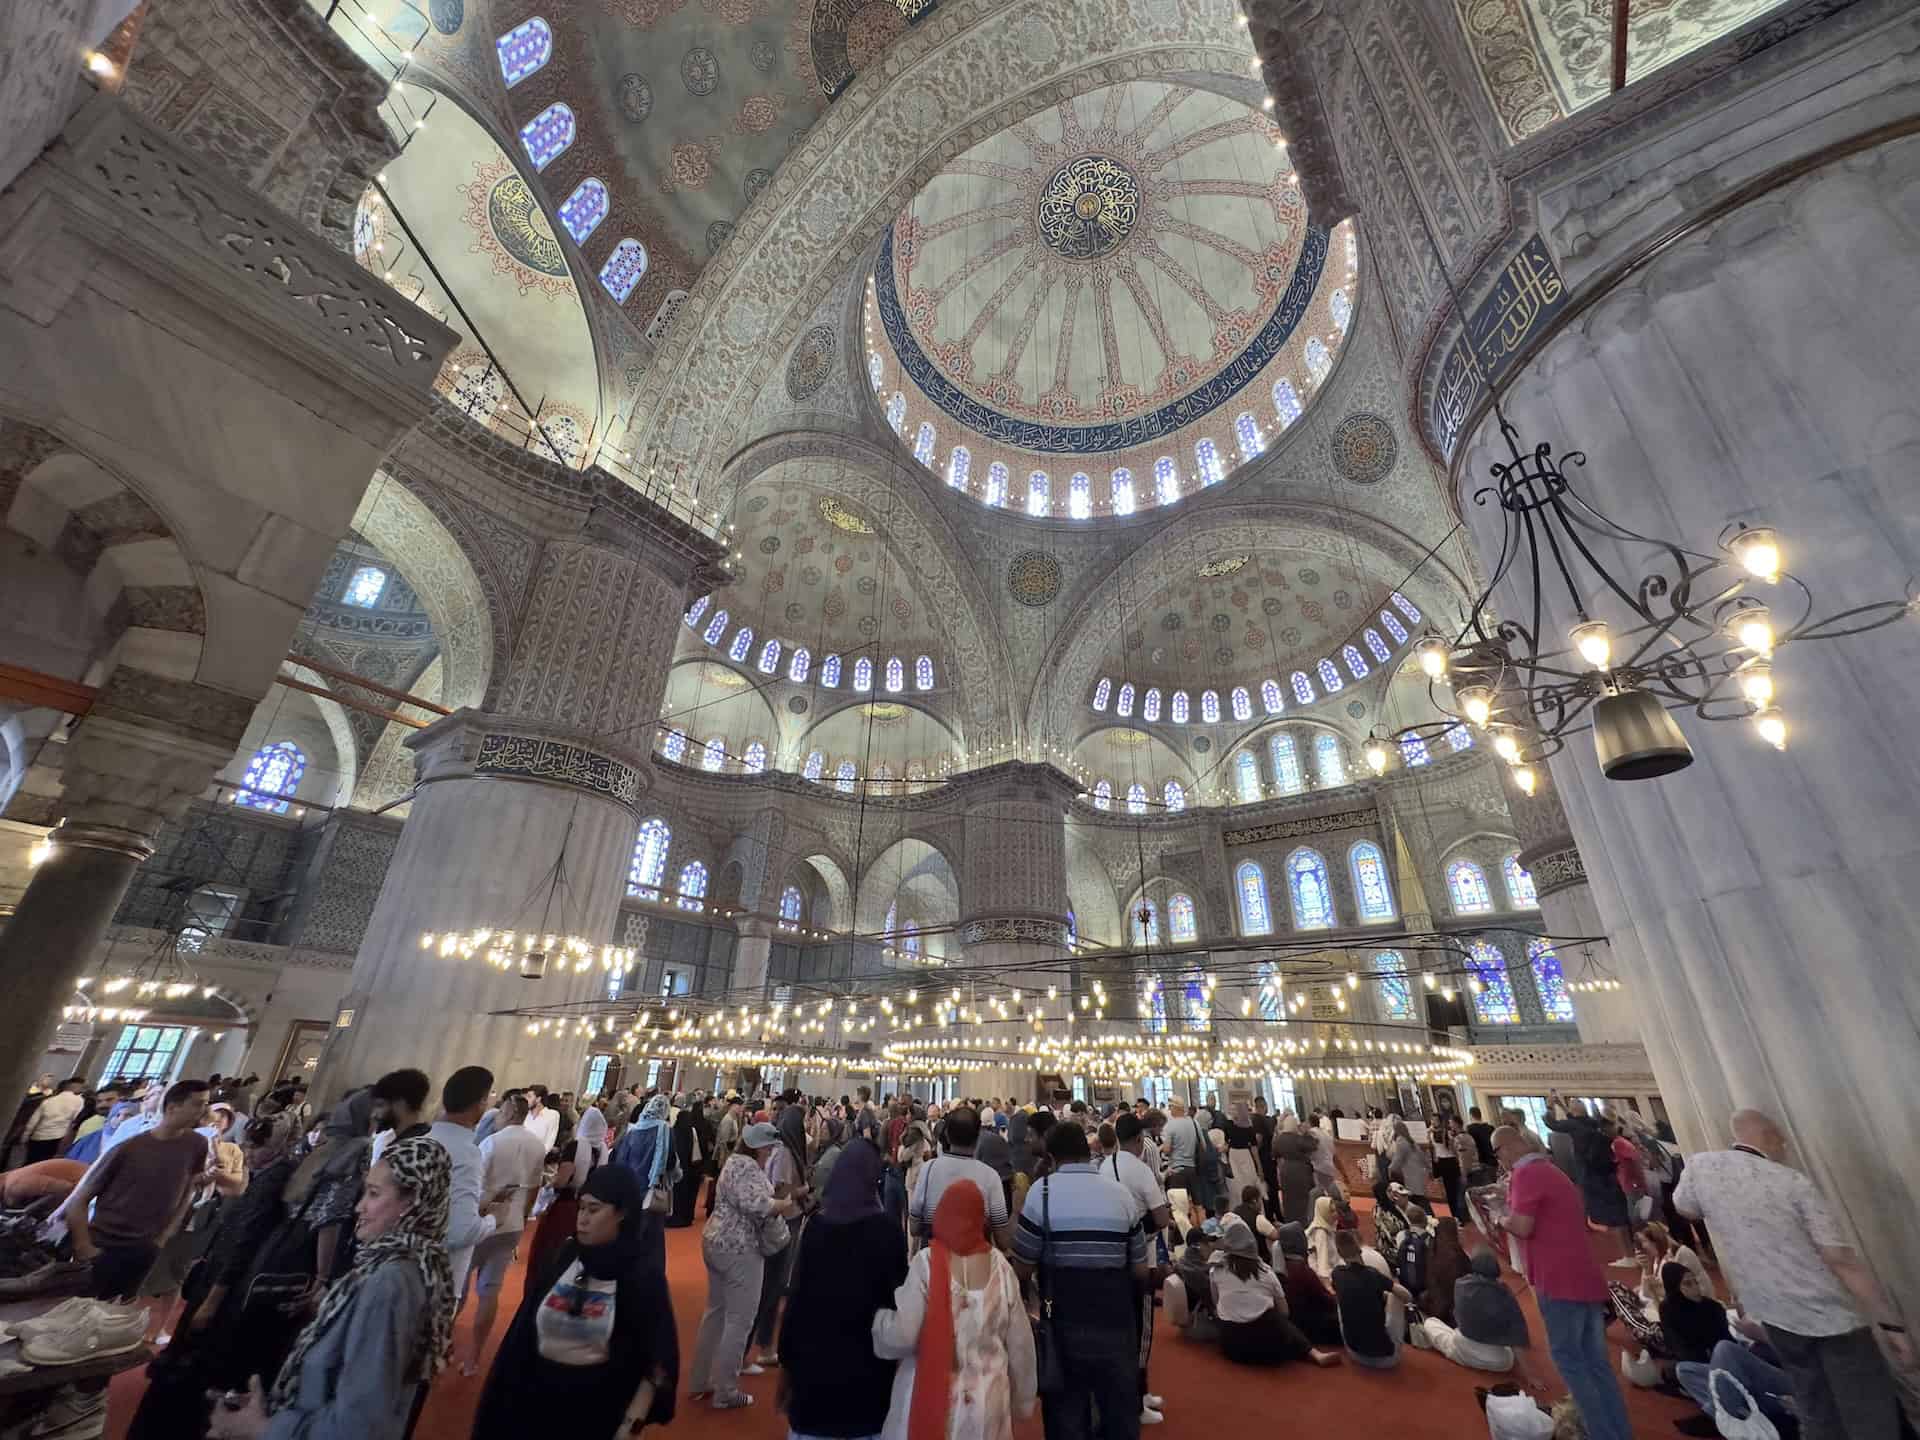 Prayer hall of the Blue Mosque in Istanbul, Turkey